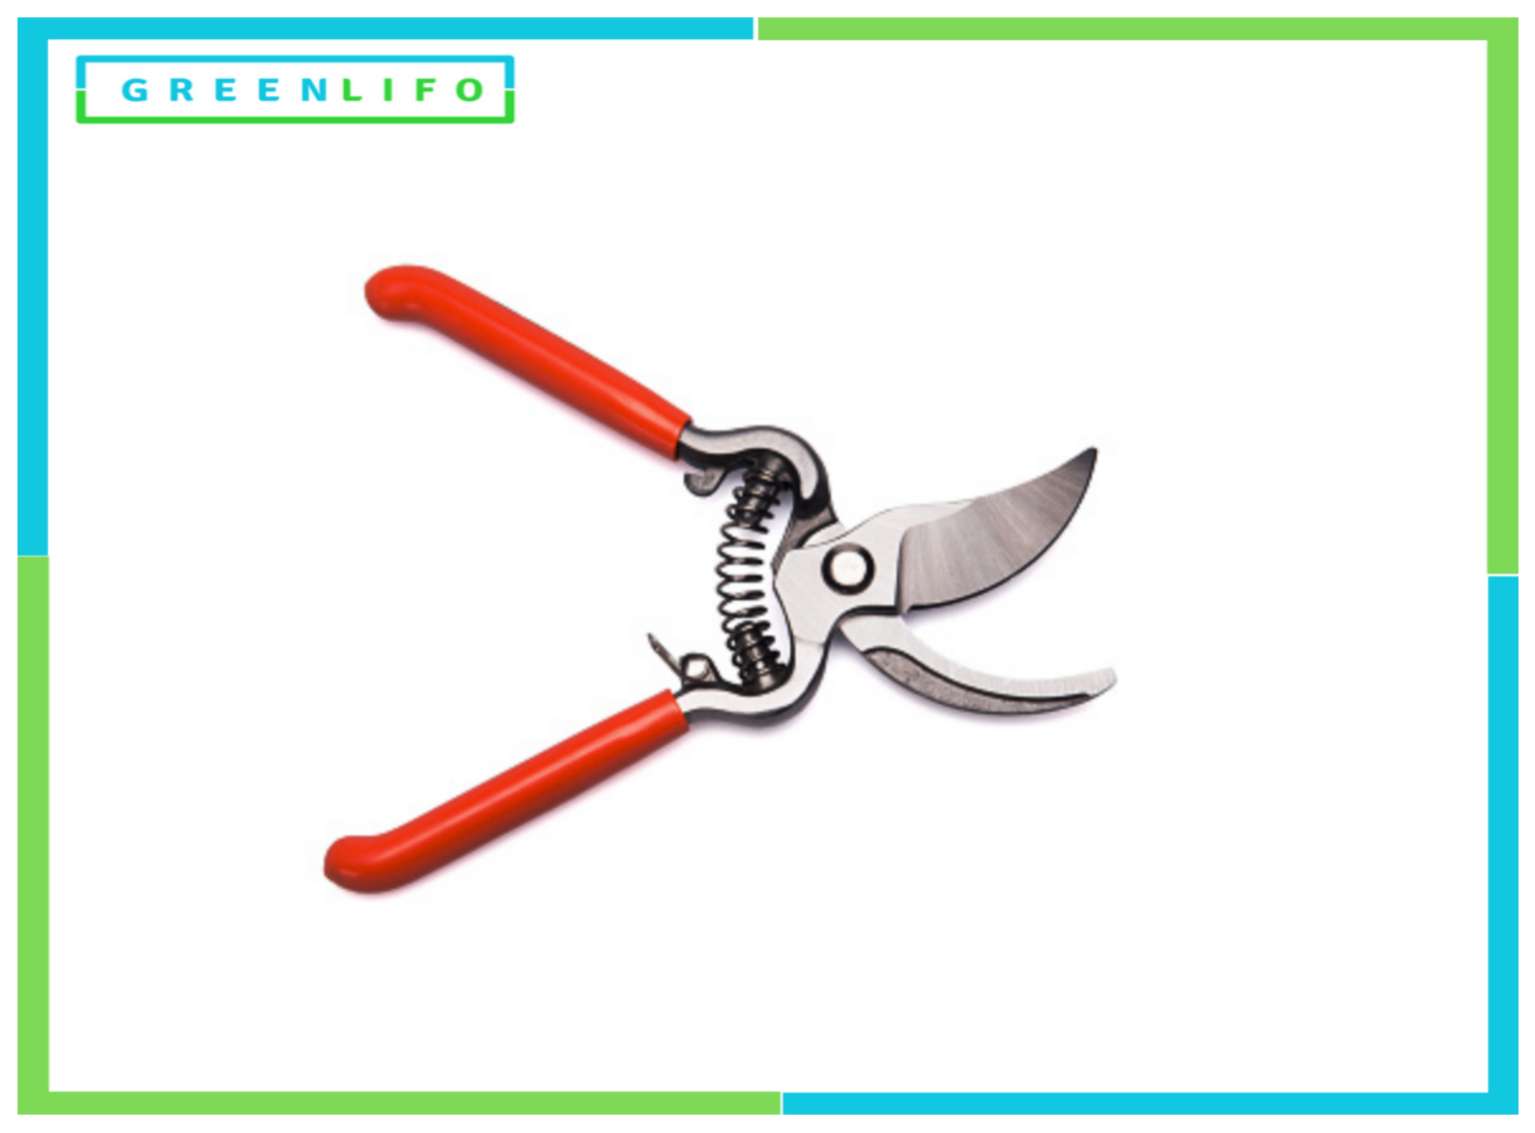 Pruning shears farm tools and equipment